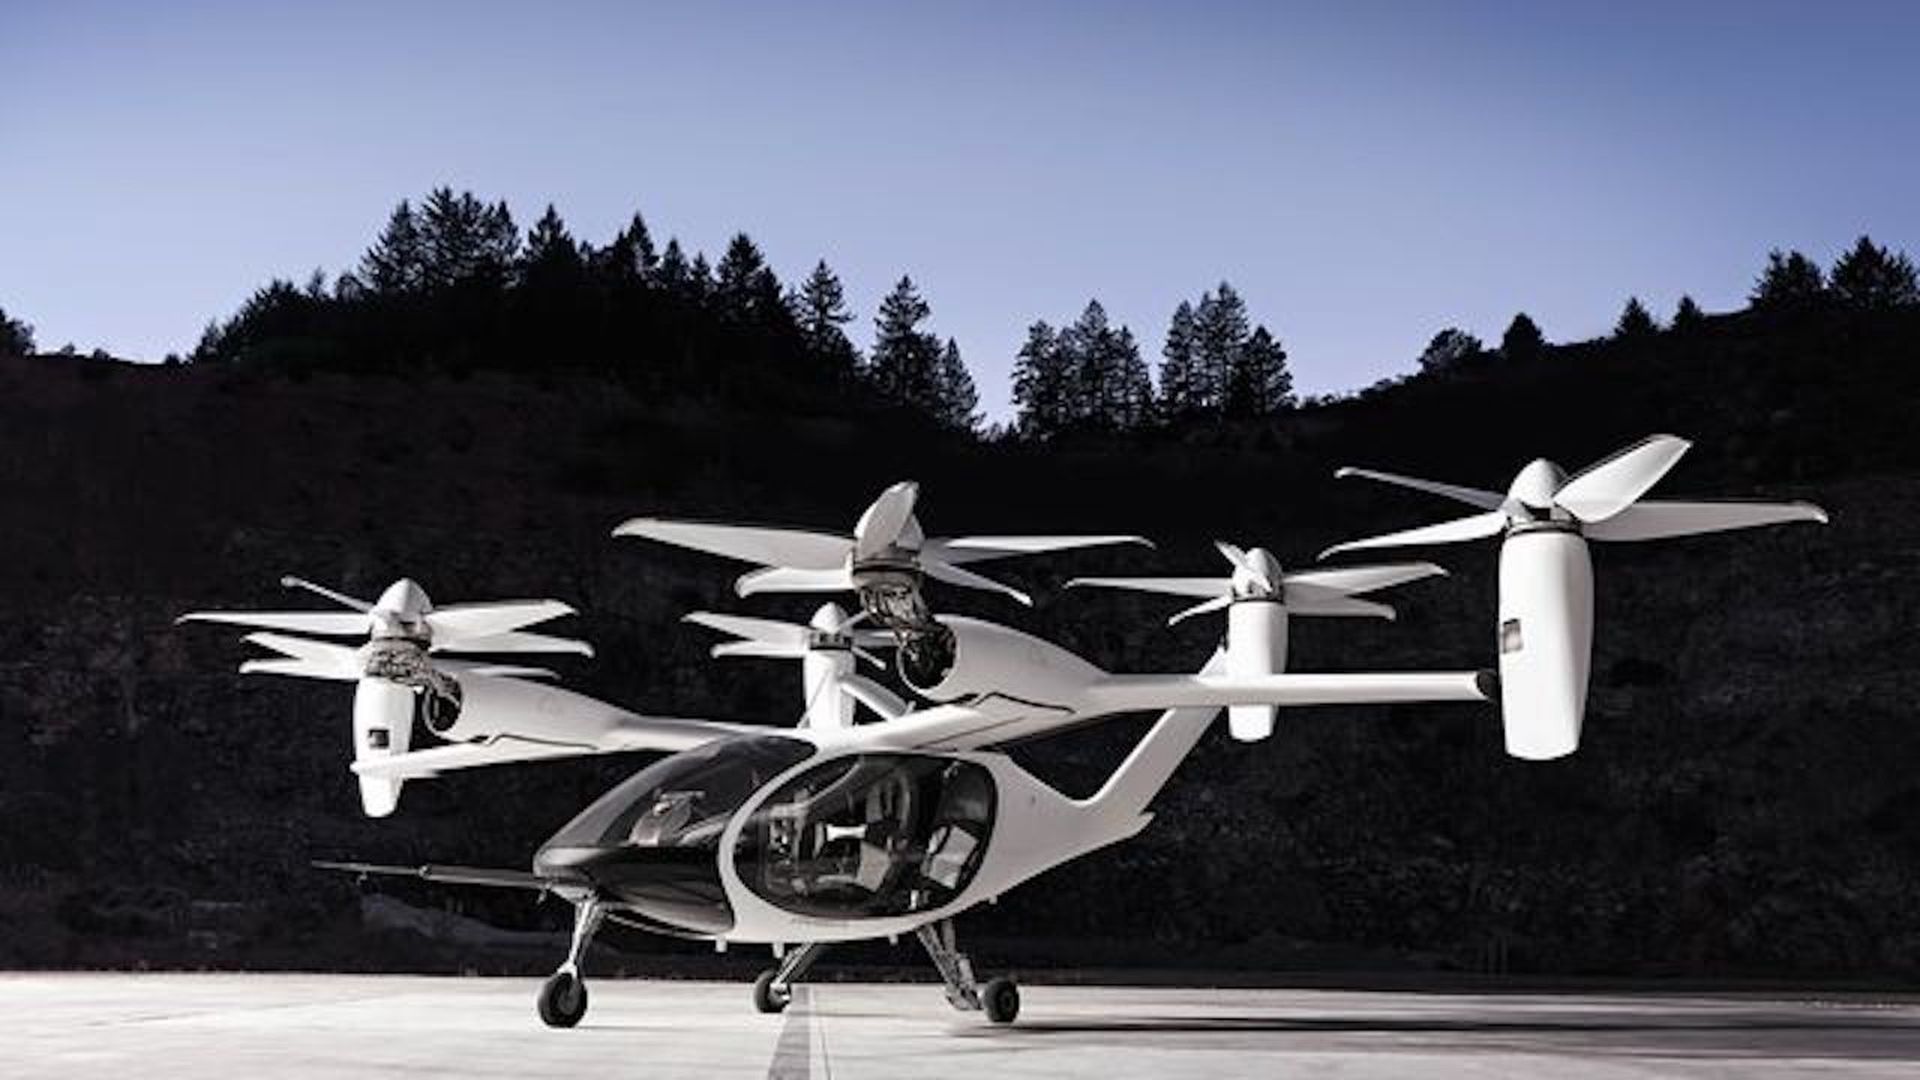 Joby Aviation's electric air taxi.